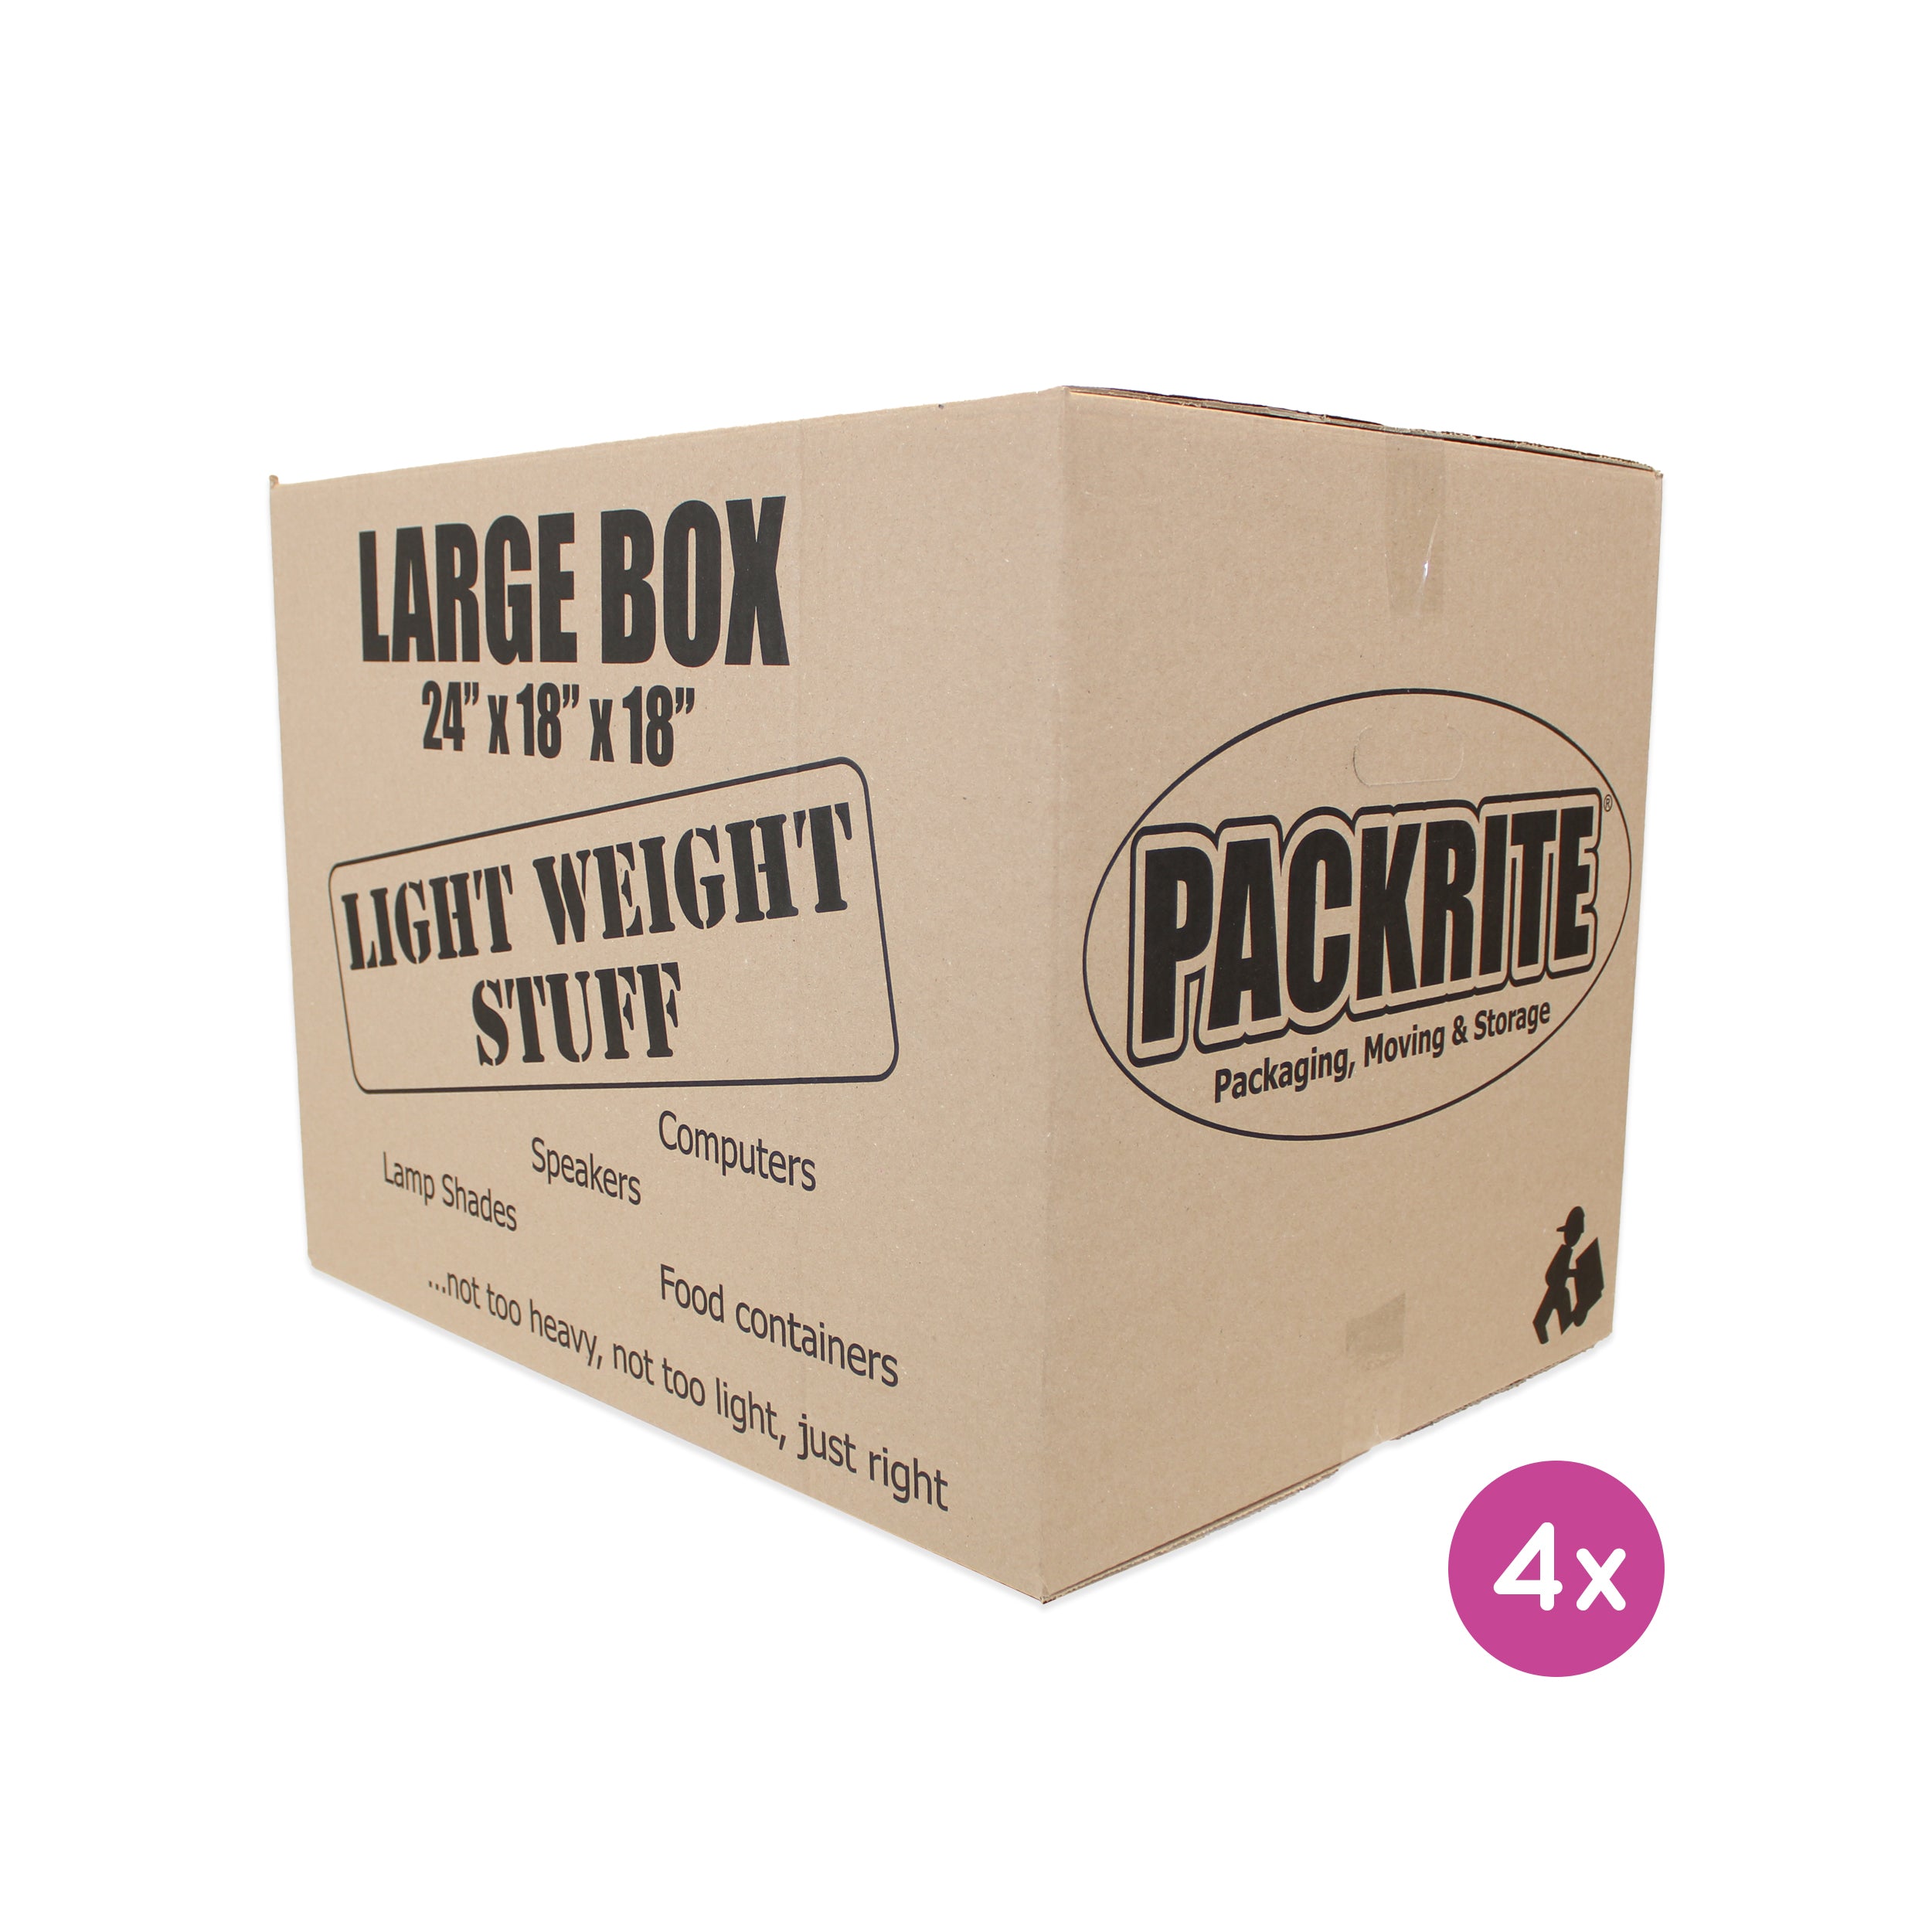 PackRite GlassGuard Protection Kit - Contains: Cardboard Cell  Partitions,Pouches